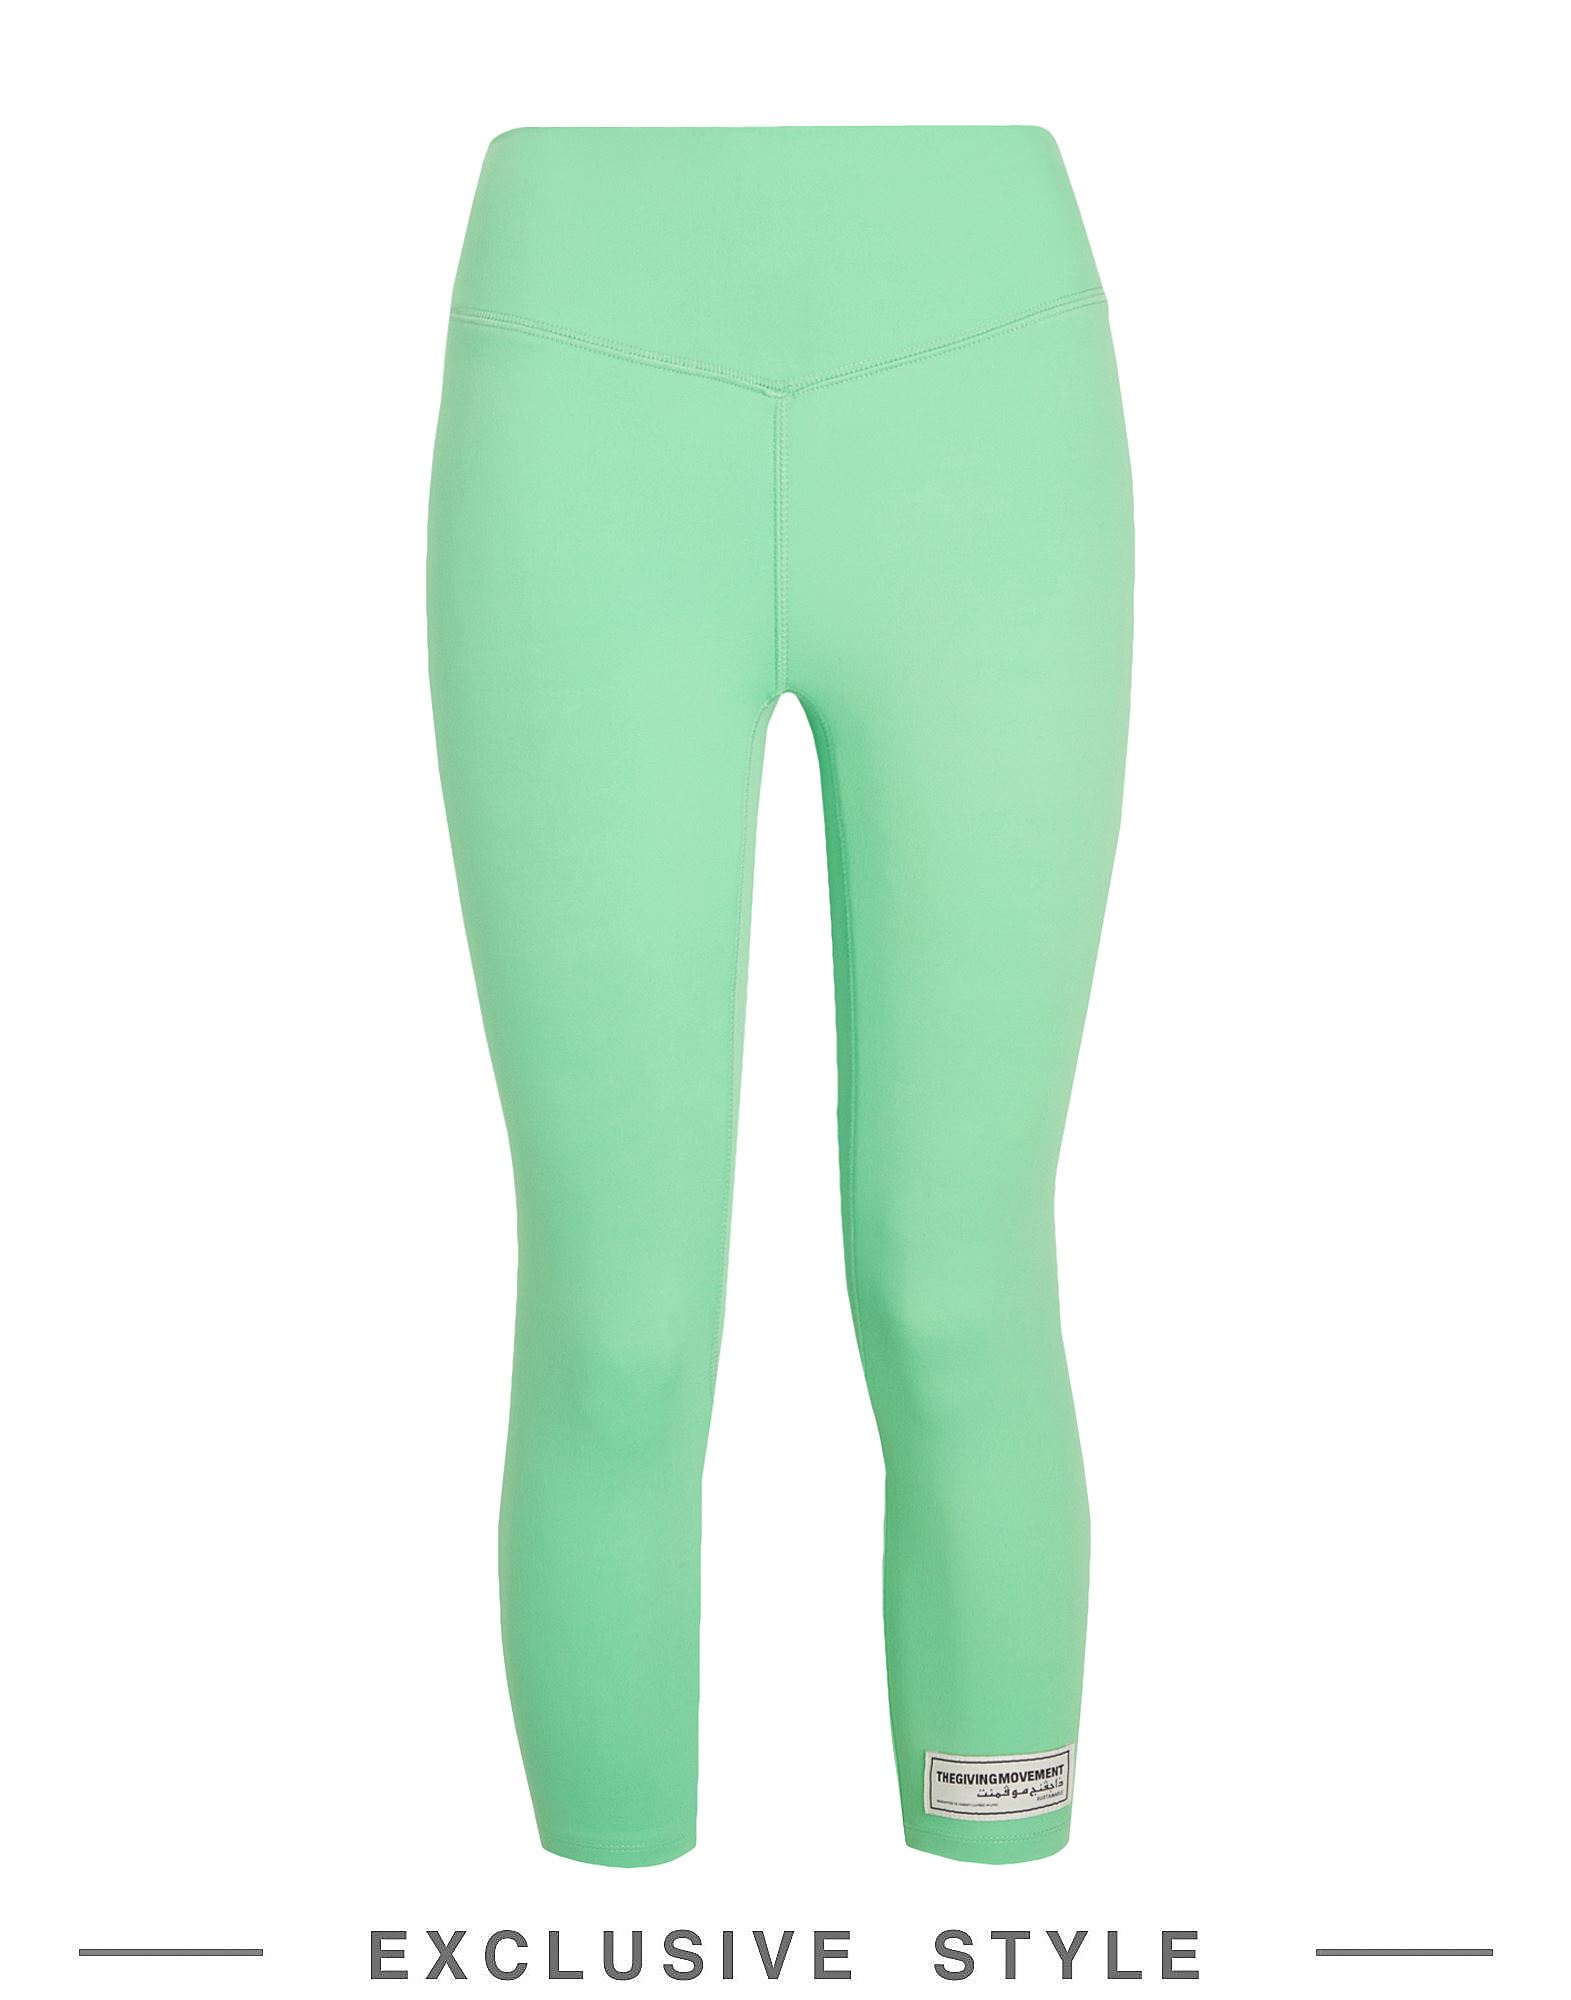 The Giving Movement X Yoox Leggings In Green